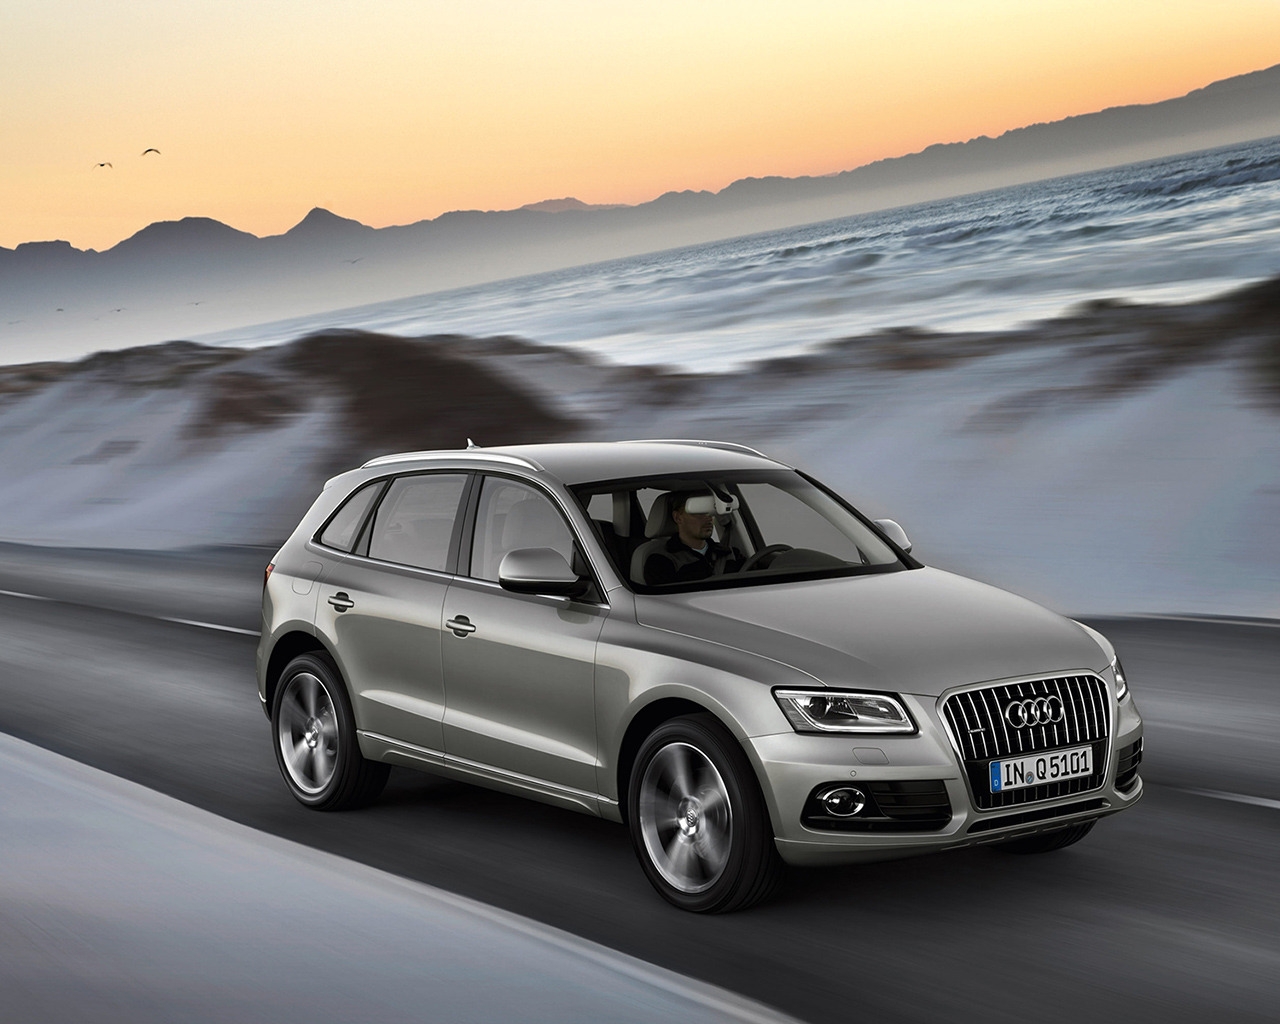 2013 Audi Q5 for 1280 x 1024 resolution